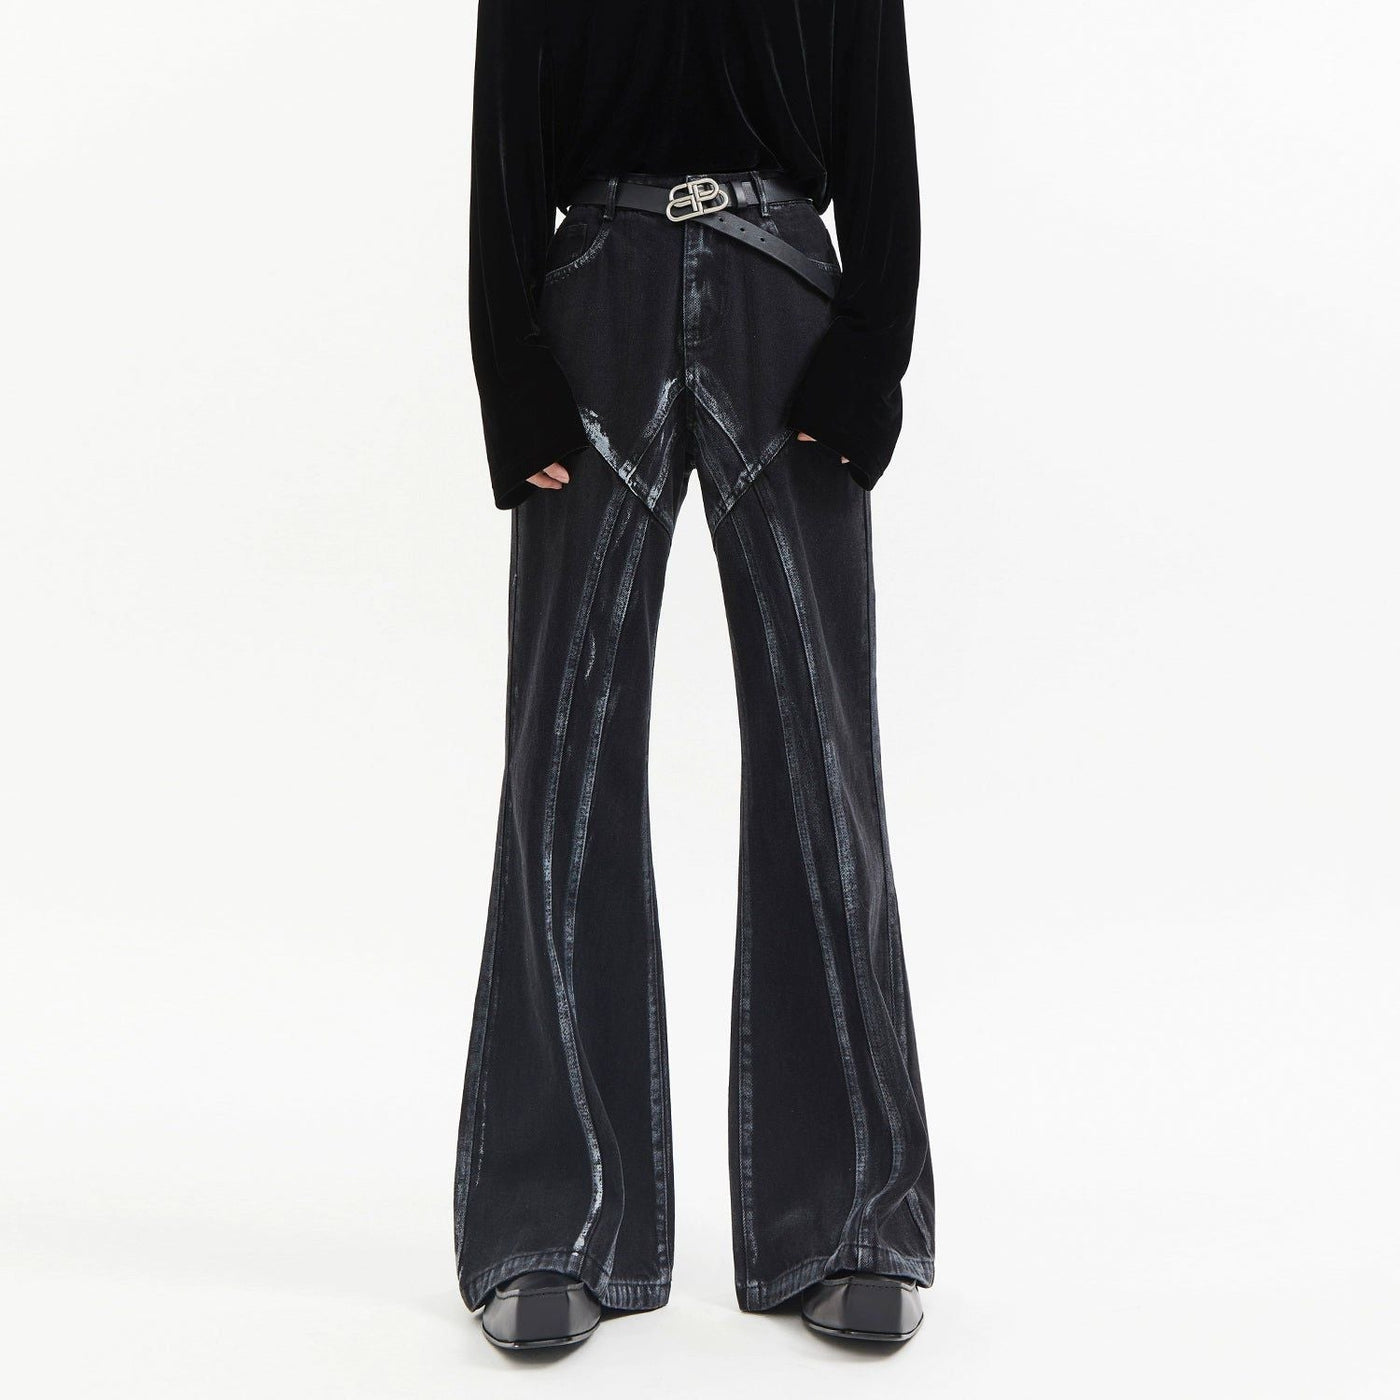 Painted Lines High Waisted Jeans Korean Street Fashion Jeans By Slim Black Shop Online at OH Vault